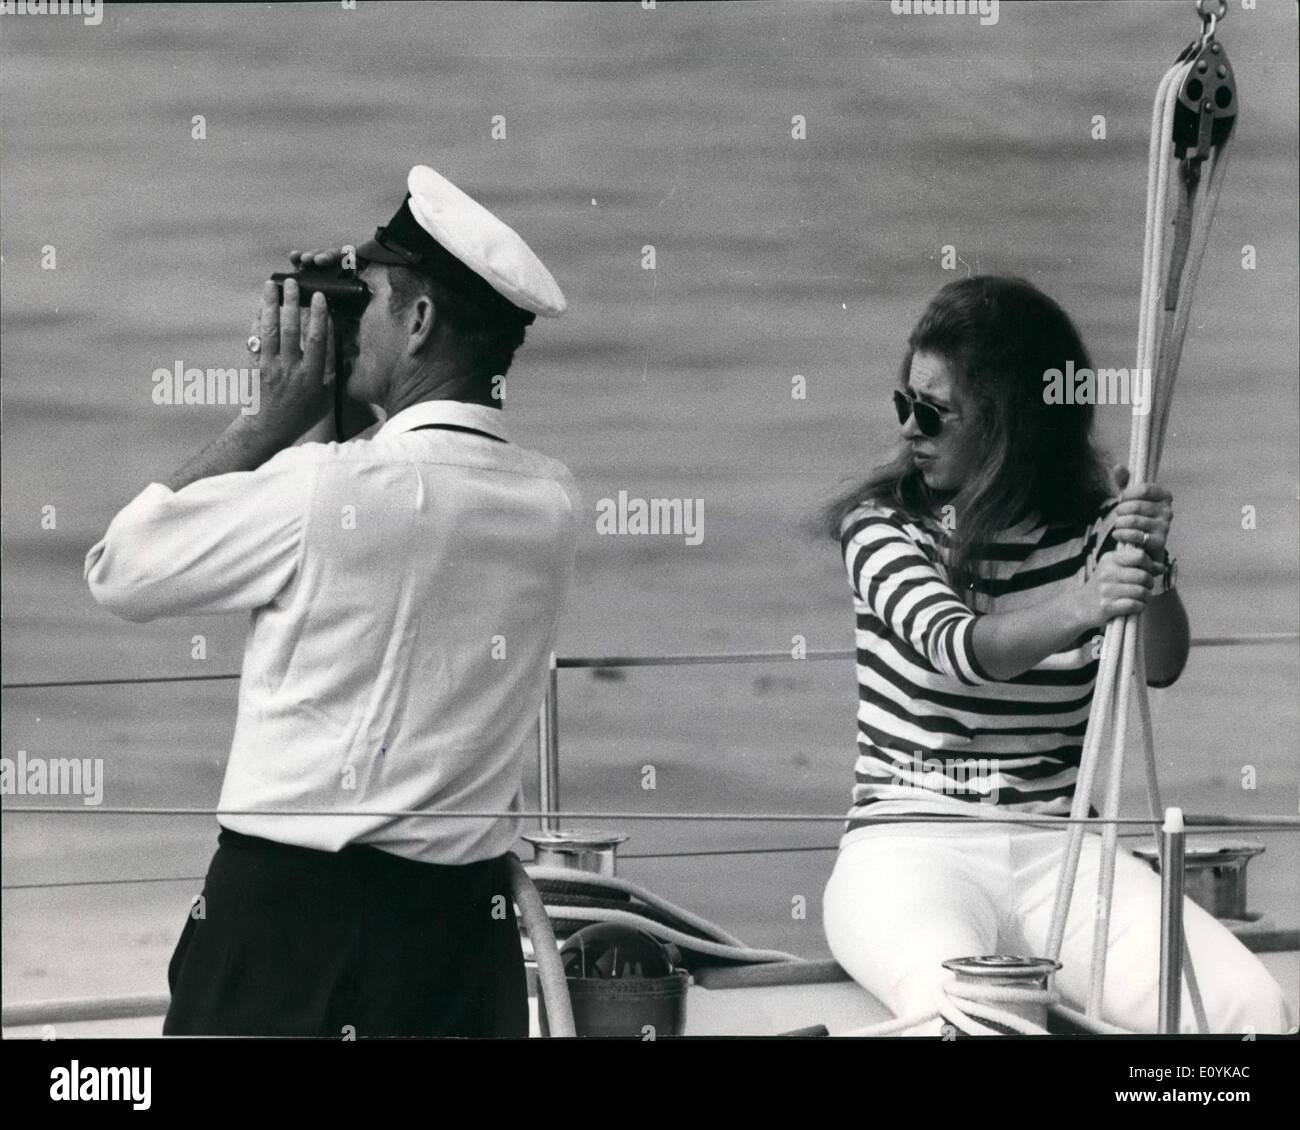 Aug. 08, 1970 - Royals at Cowes. OPS: Wearing a red and white striped T-Shirt, Princess Anne and Prince Philip are seen abroad Mr. Owen Aisher's sloep Yesman XVI. They crewed the yacht in the Britannia Cup today- one of the major events of Cowes week. Stock Photo